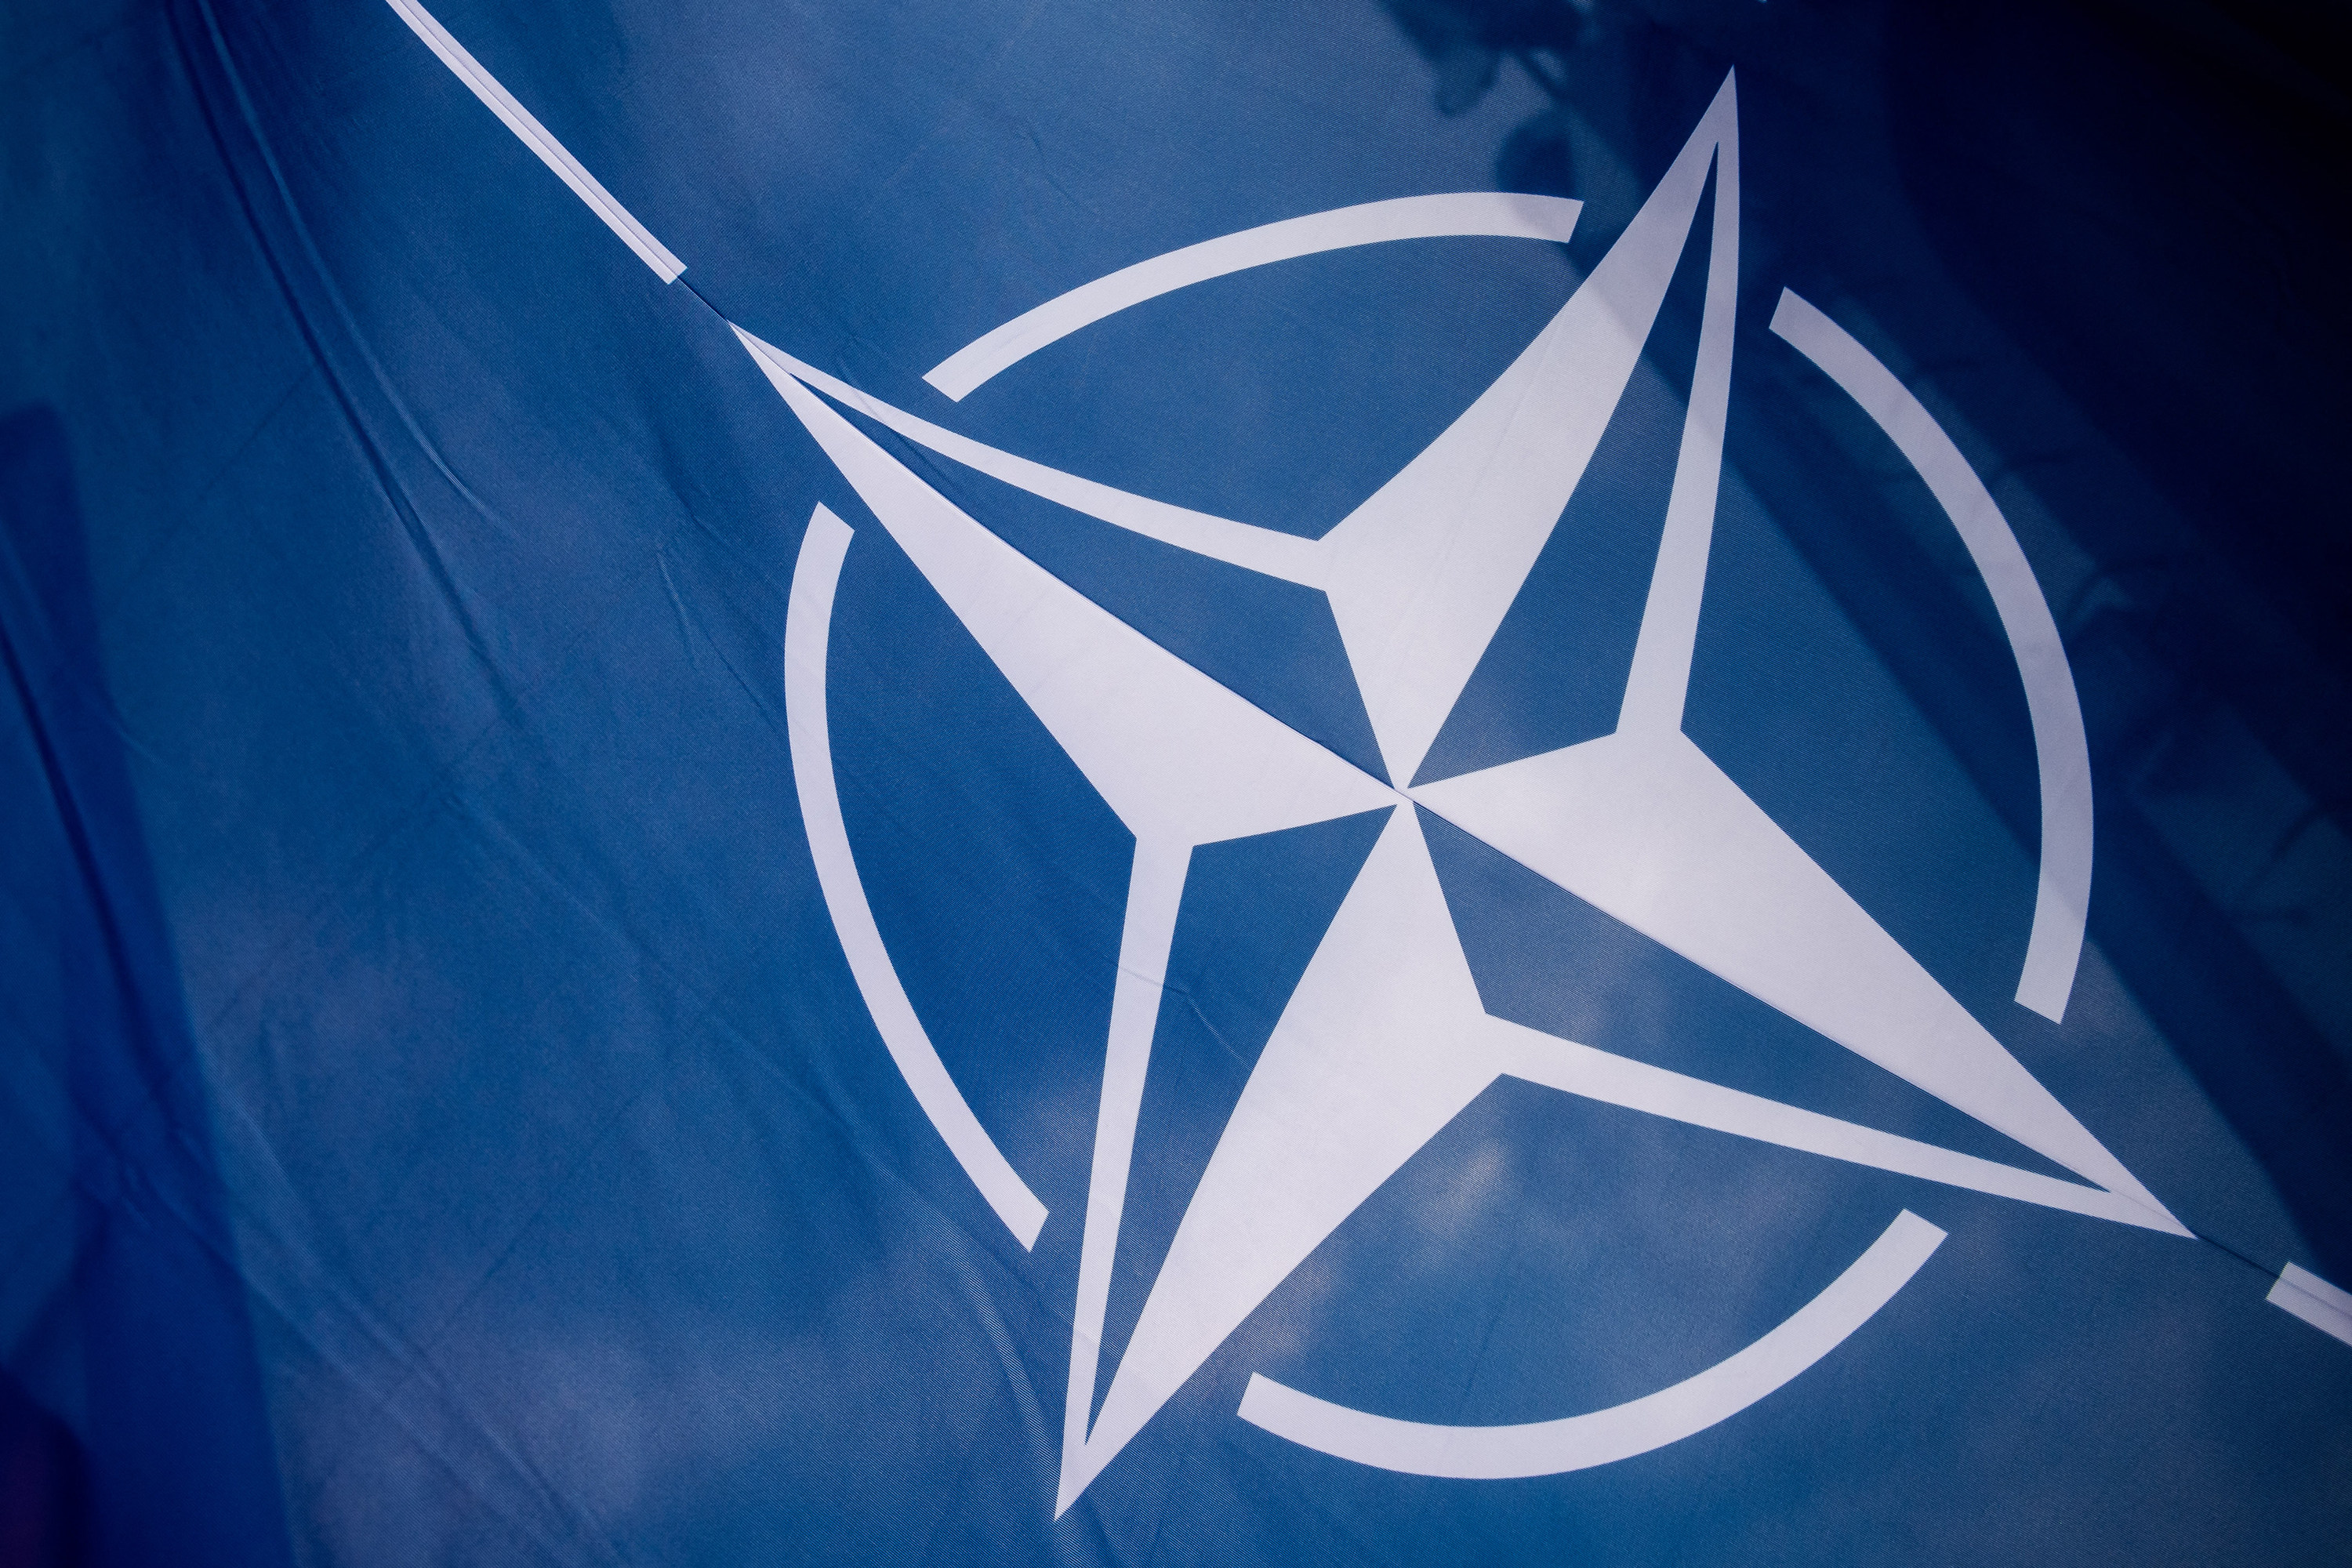 A Nato flag. On Sunday, hundreds of protesters in Stockholm demonstrated against Sweden’s Nato bid. Photo: AFP / Getty Images / TNS